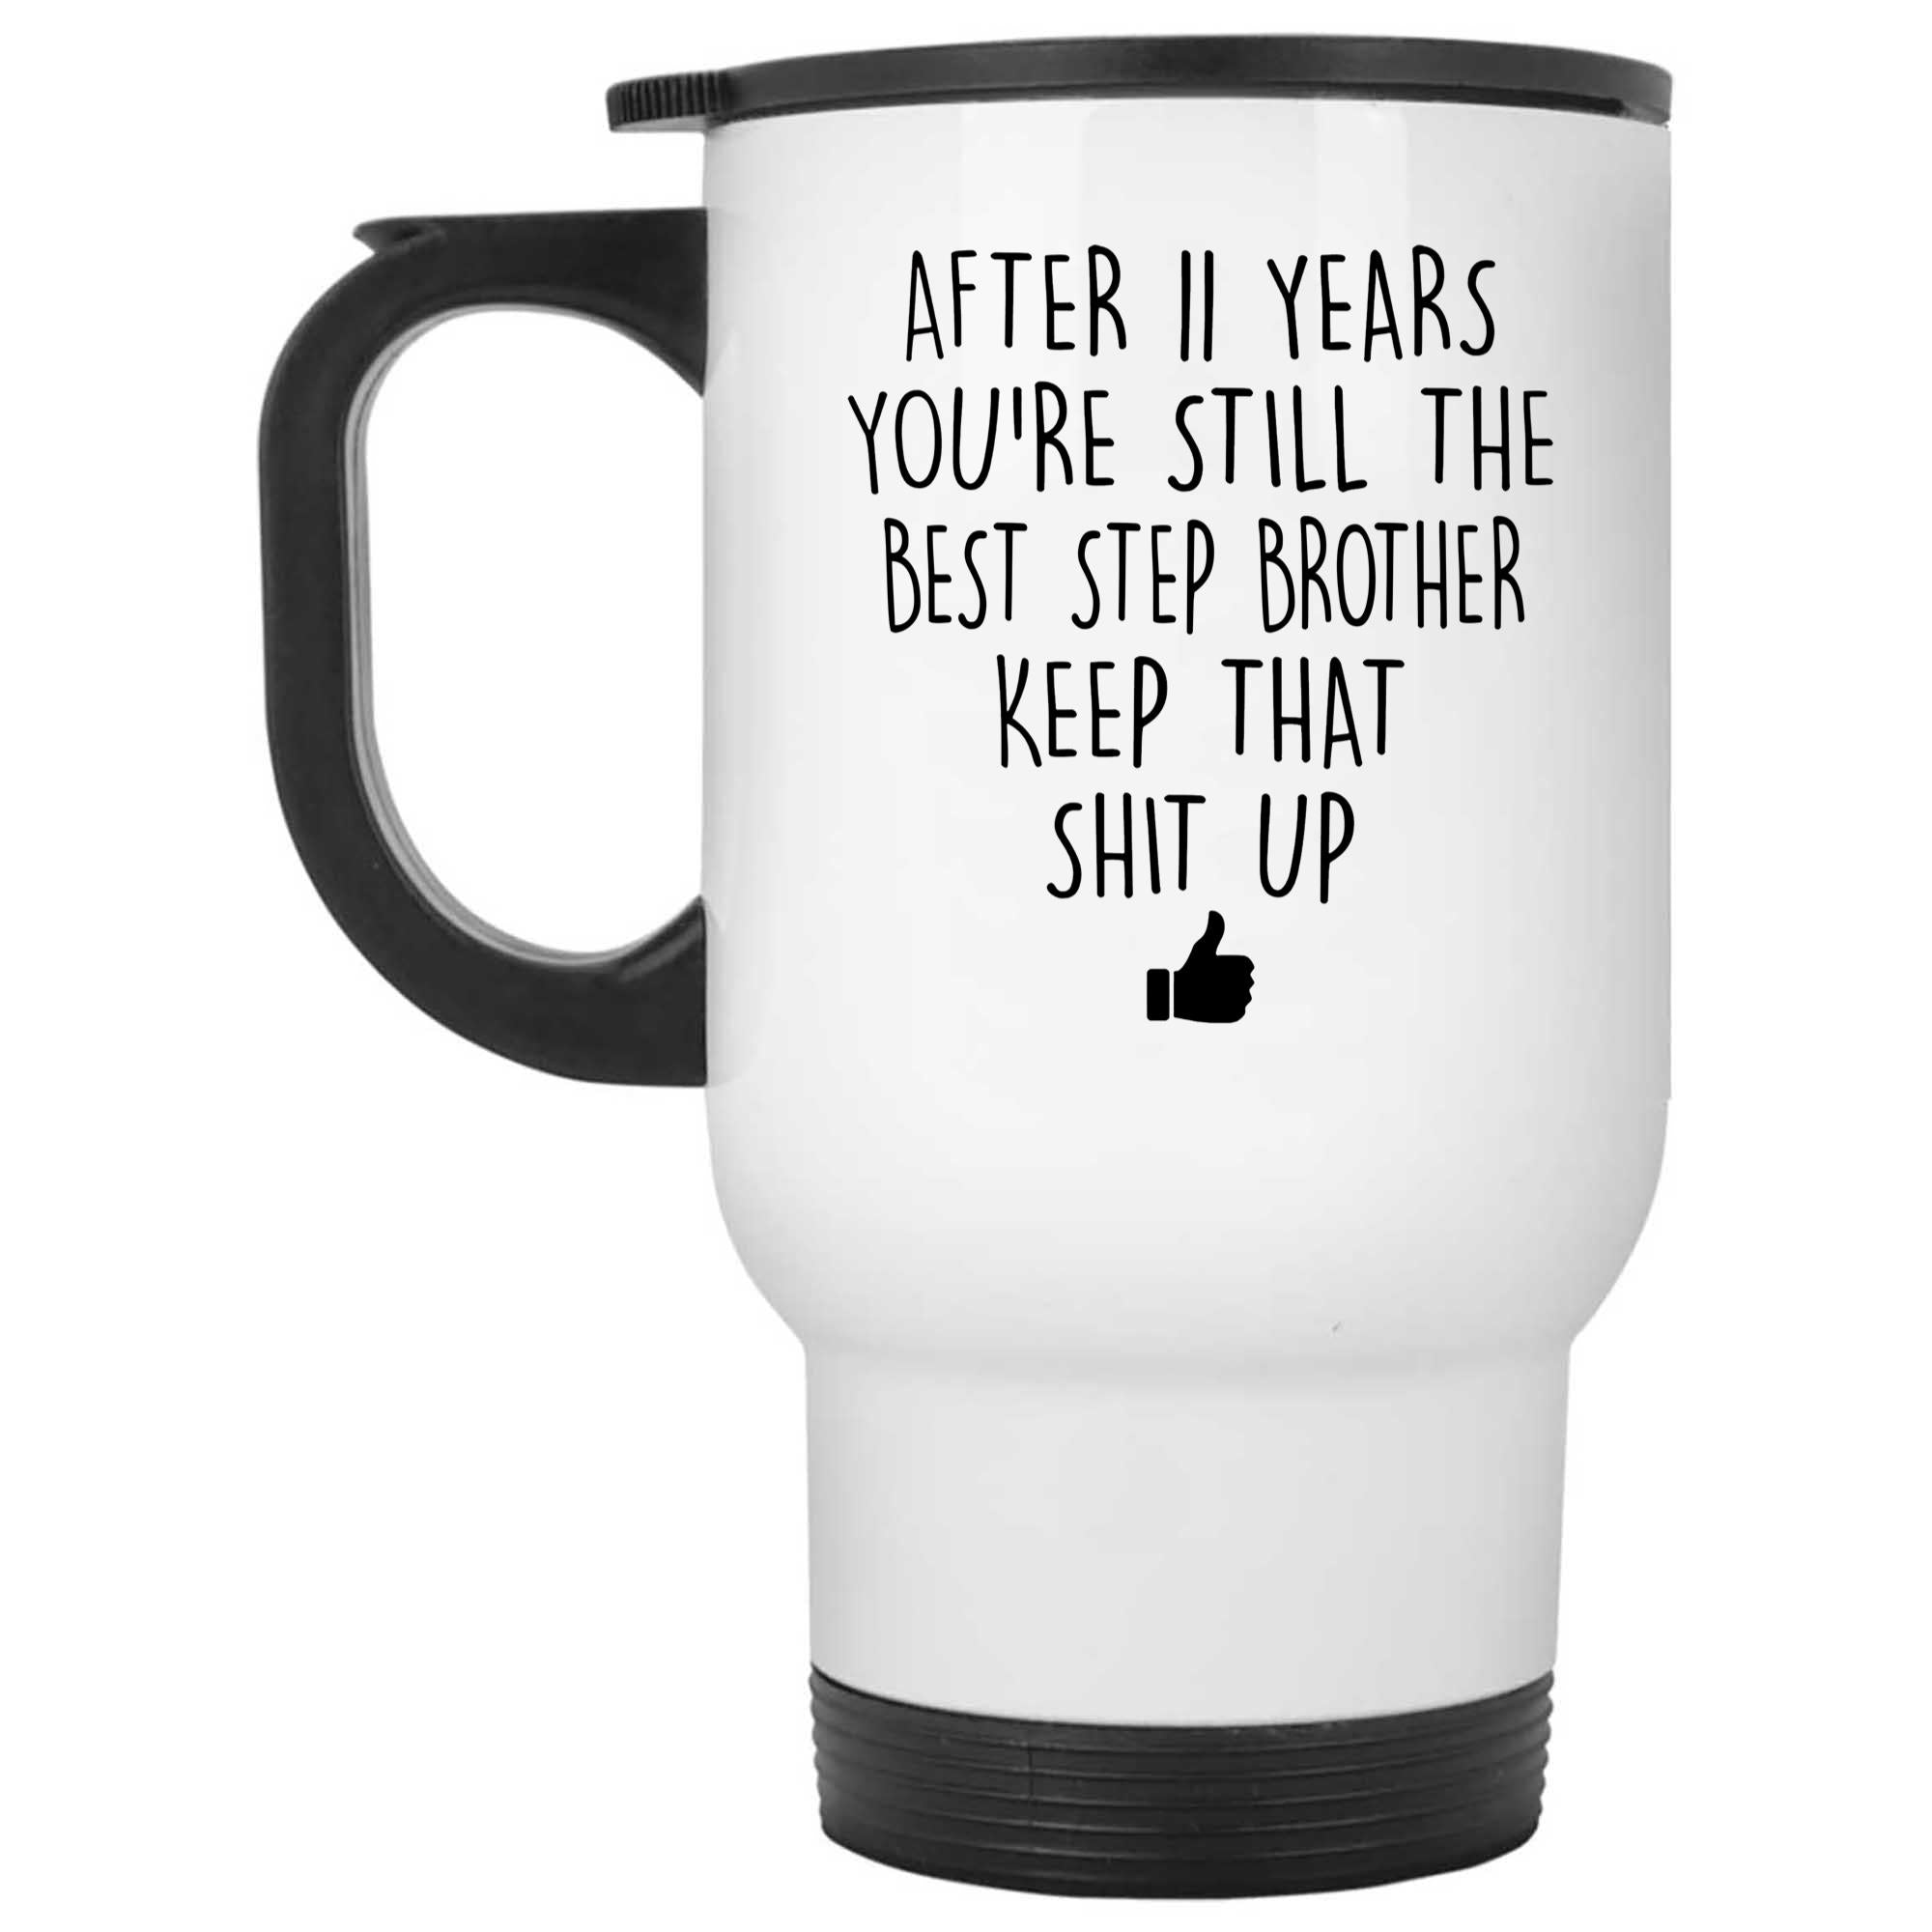 Skitongifts Funny Ceramic Novelty Coffee Mug After Custom Years You're Still The Best Step Brother Keep That Shit Up OtvFqIL